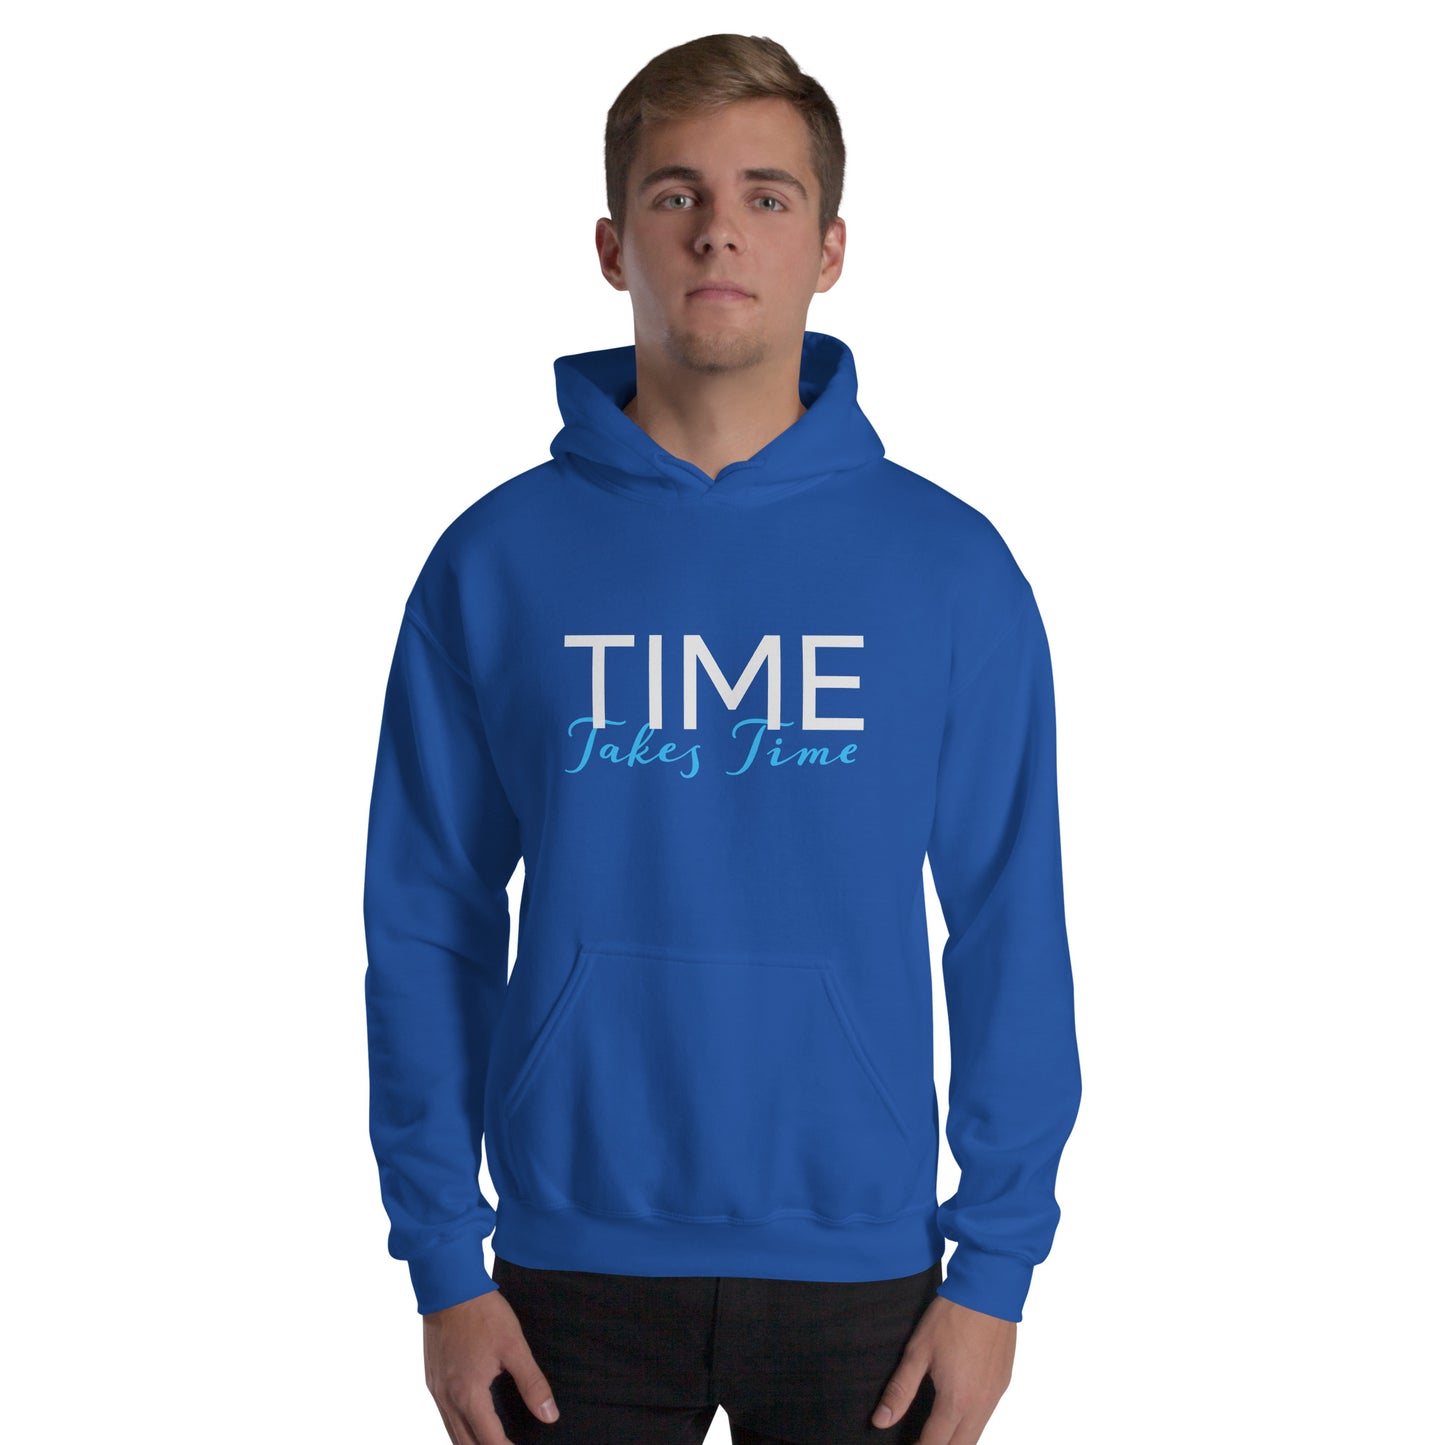 Times Takes Time Unisex Hoodie